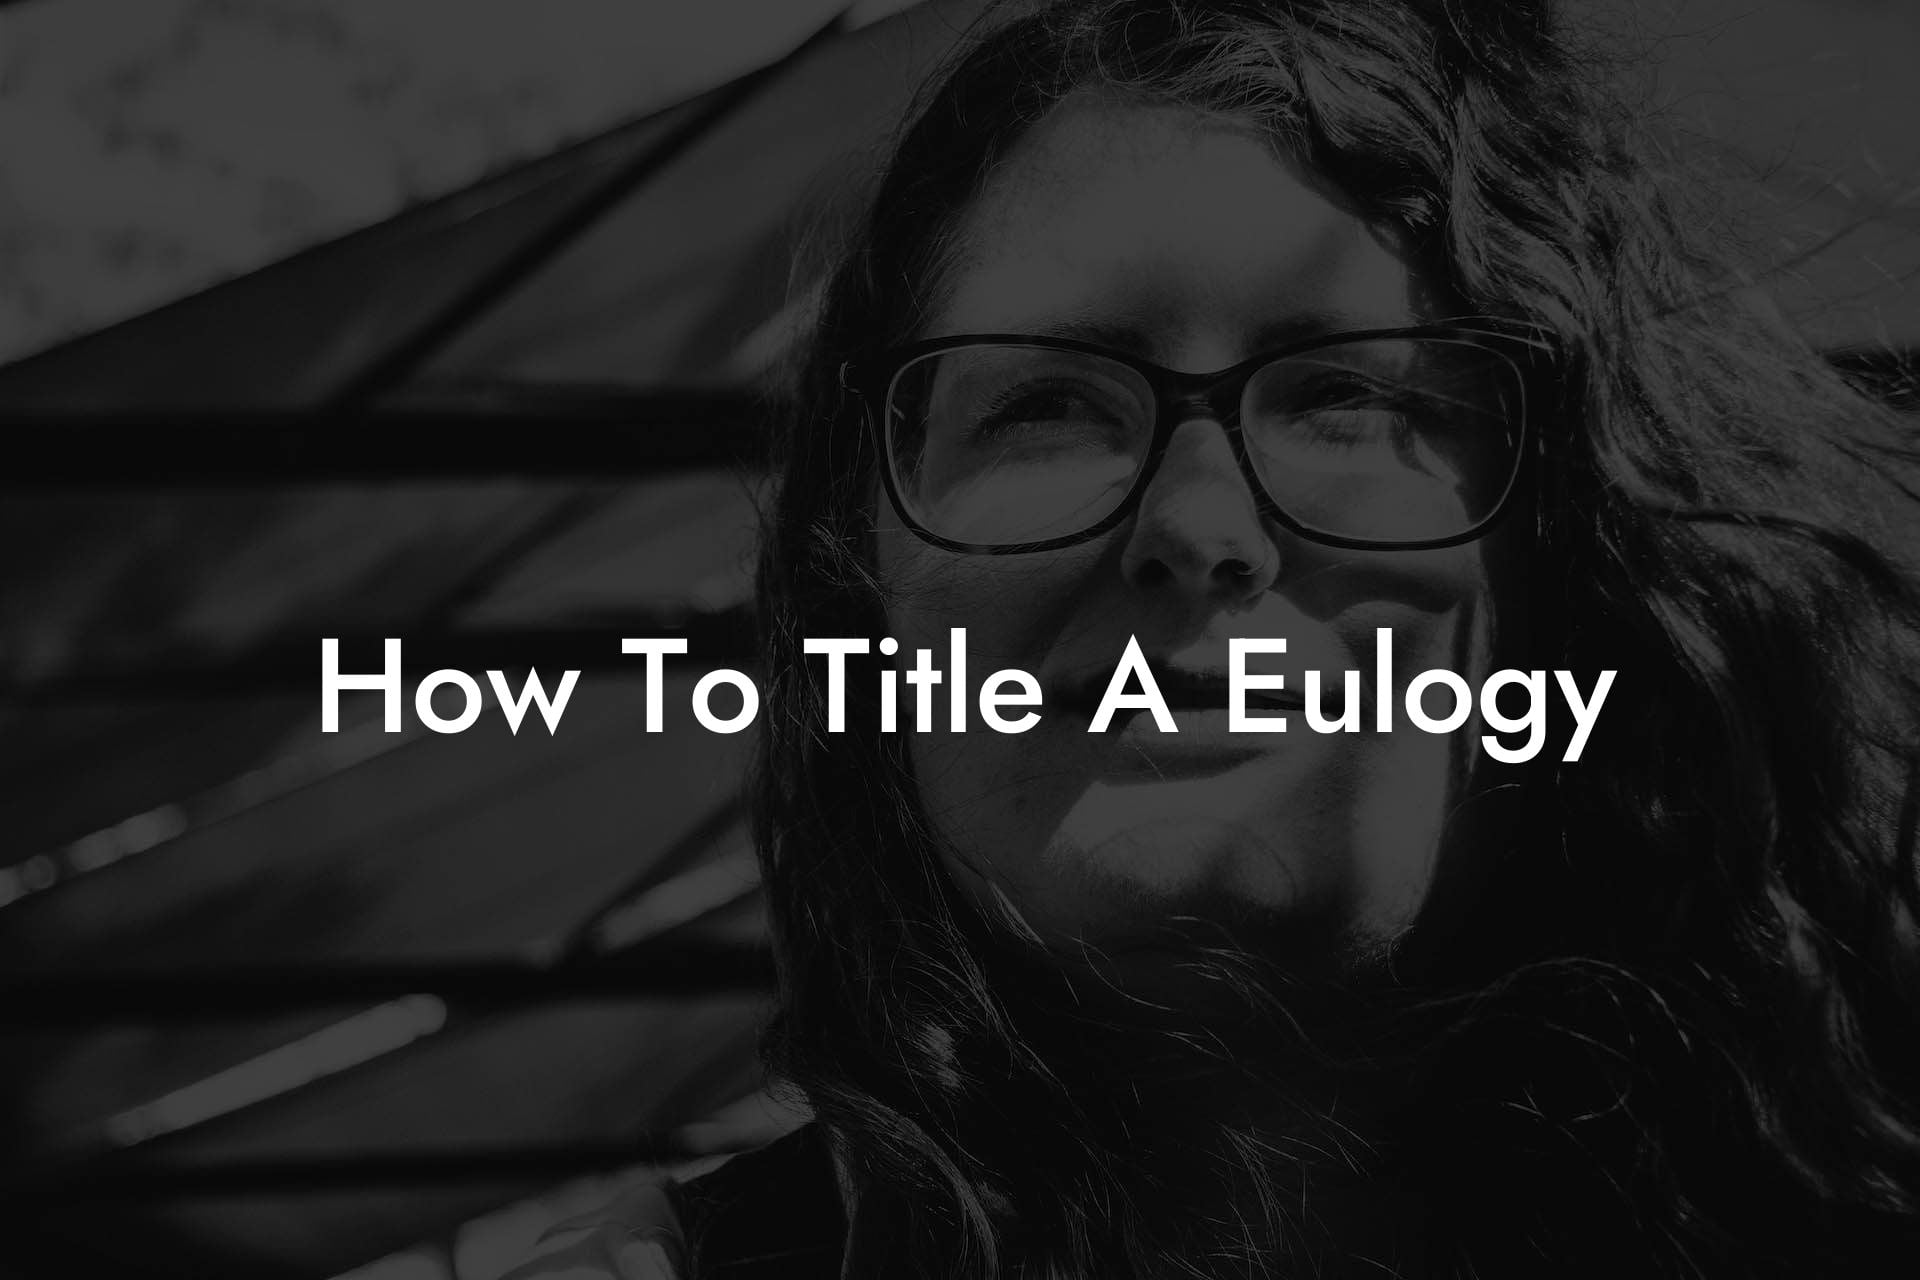 How To Title A Eulogy